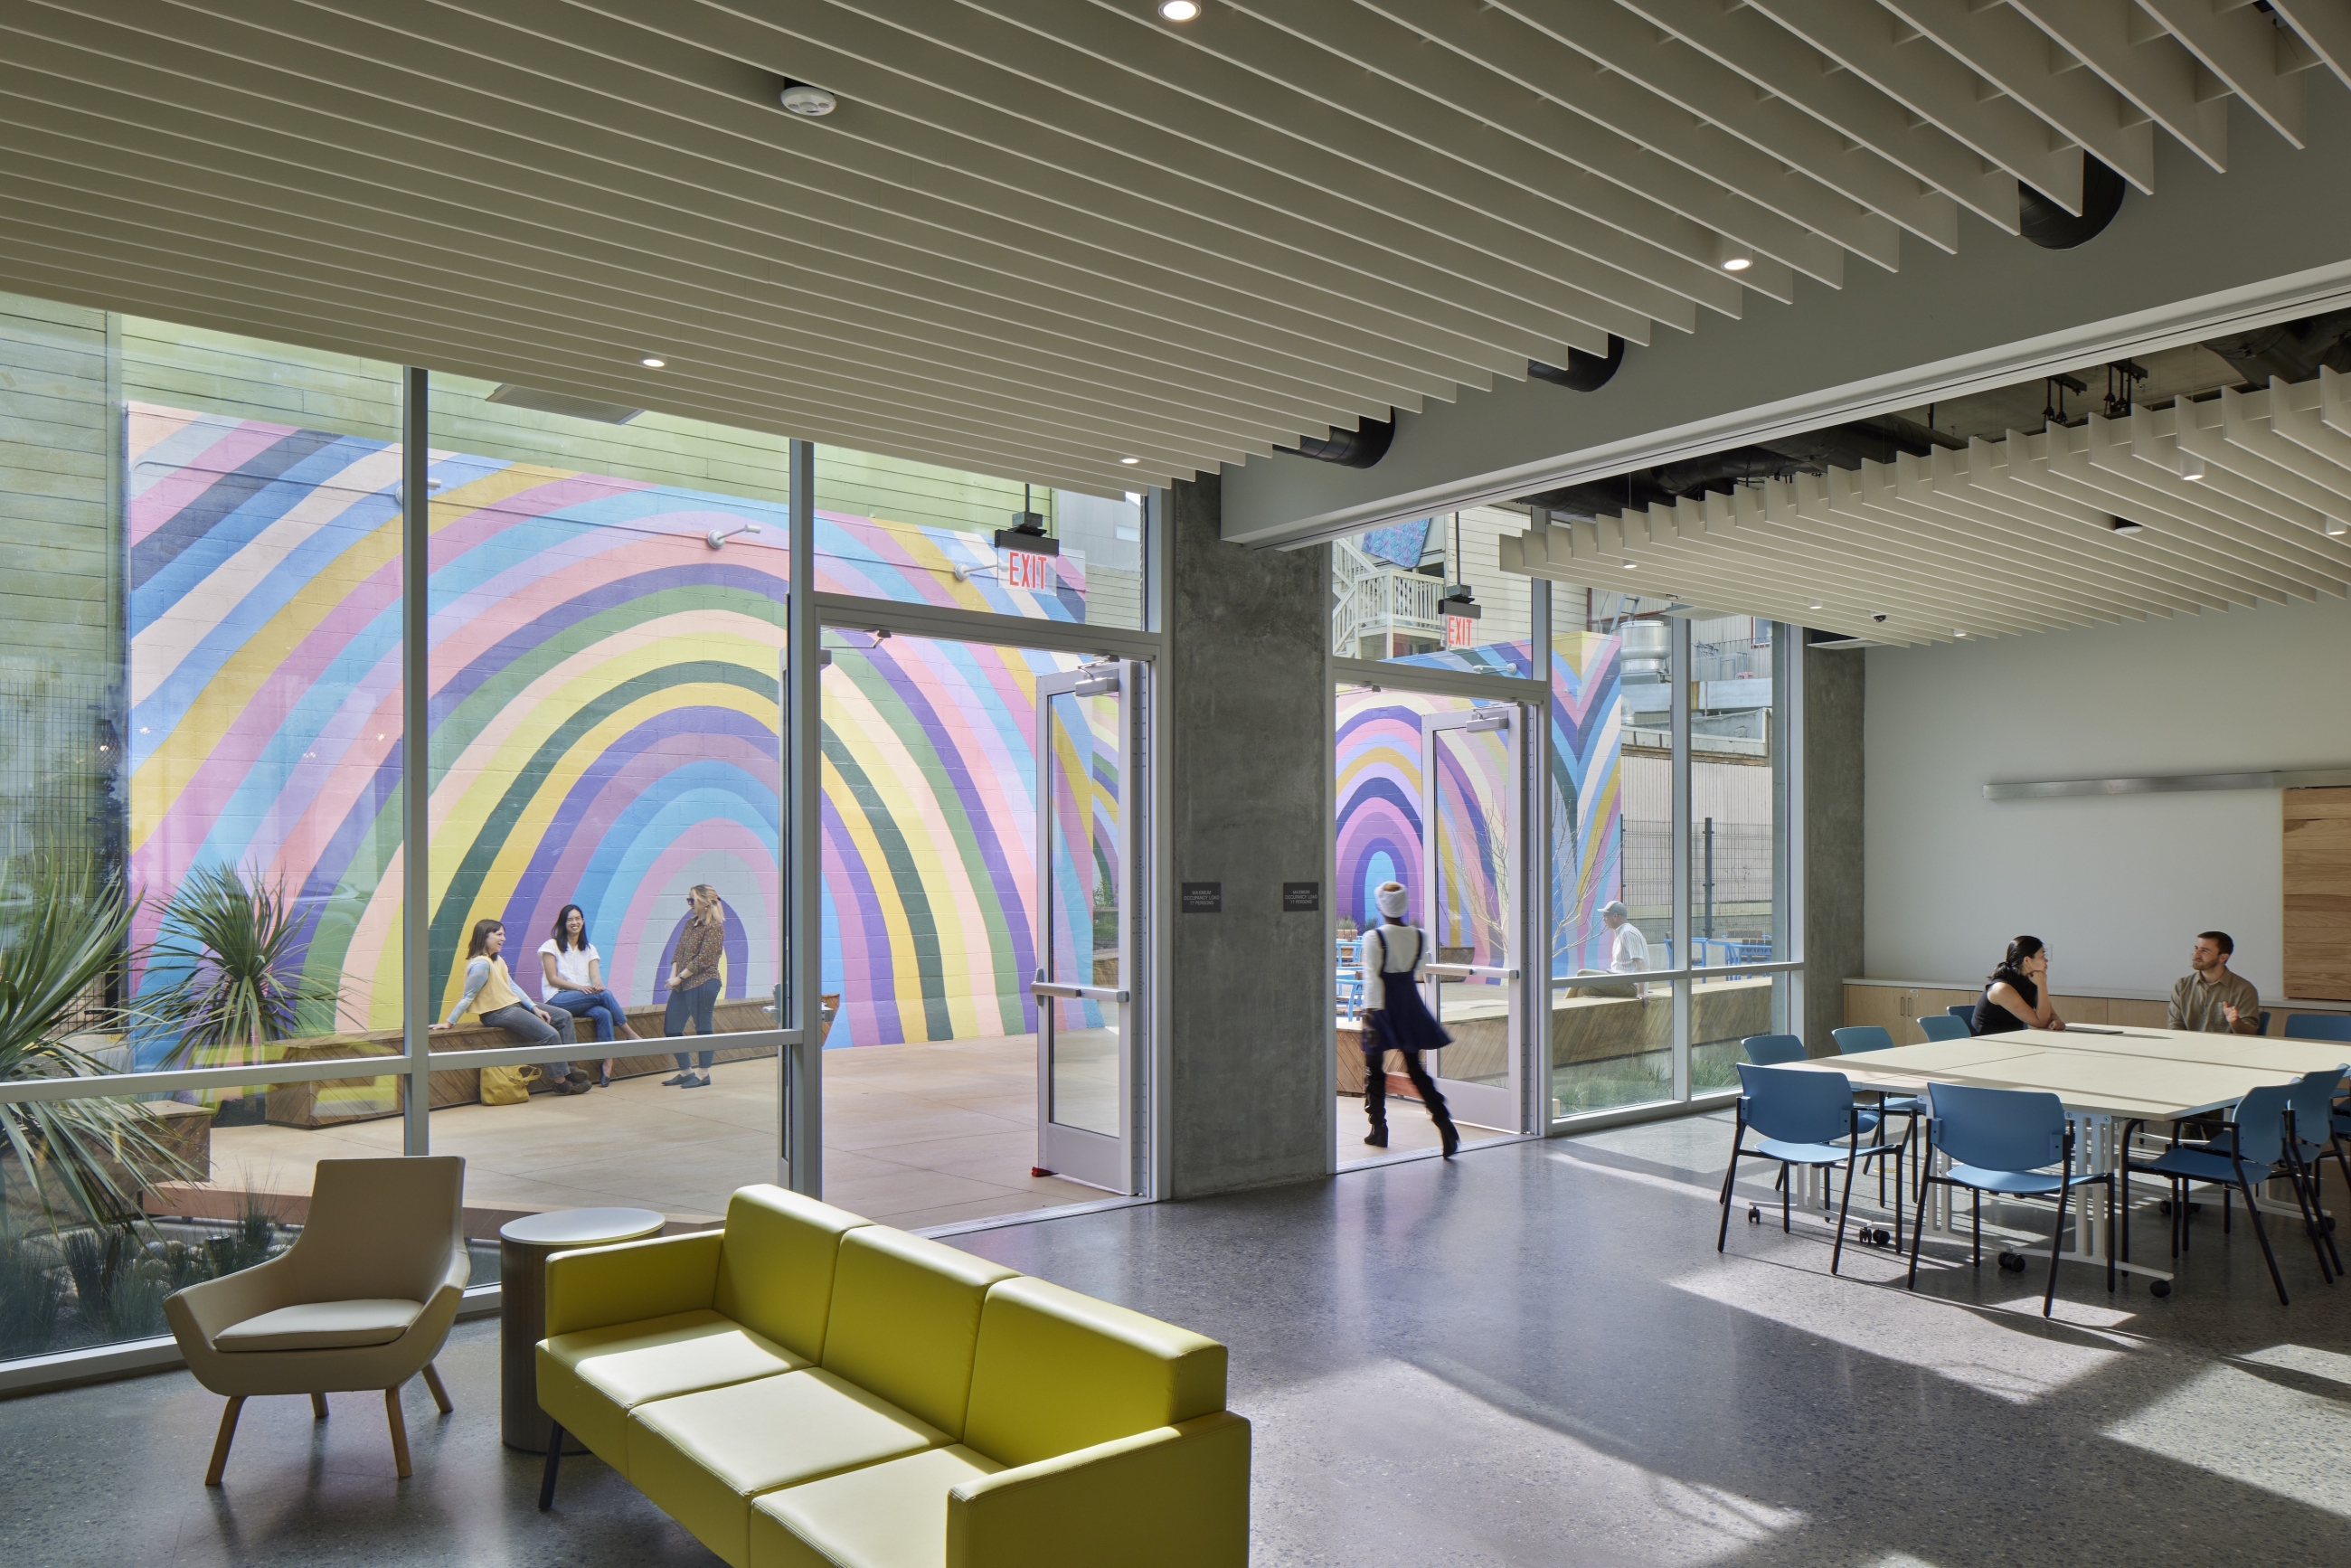 View through community room out glass wall toward courtyard, featuring rainbow murals in courtyard.